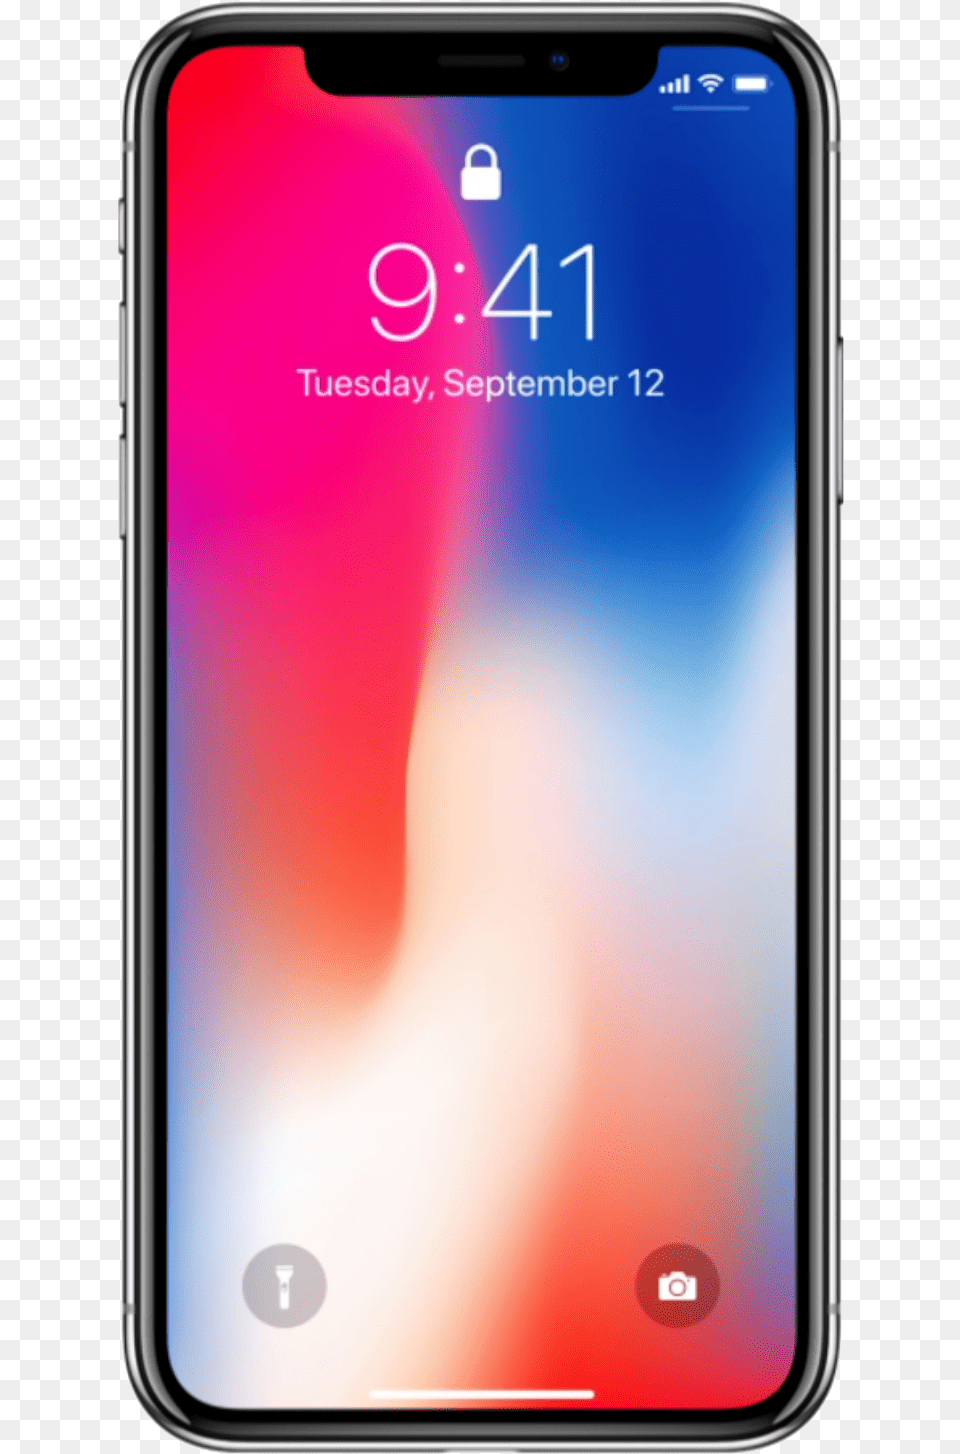 Iphone X Iphone X Transparent Background, Electronics, Mobile Phone, Phone Png